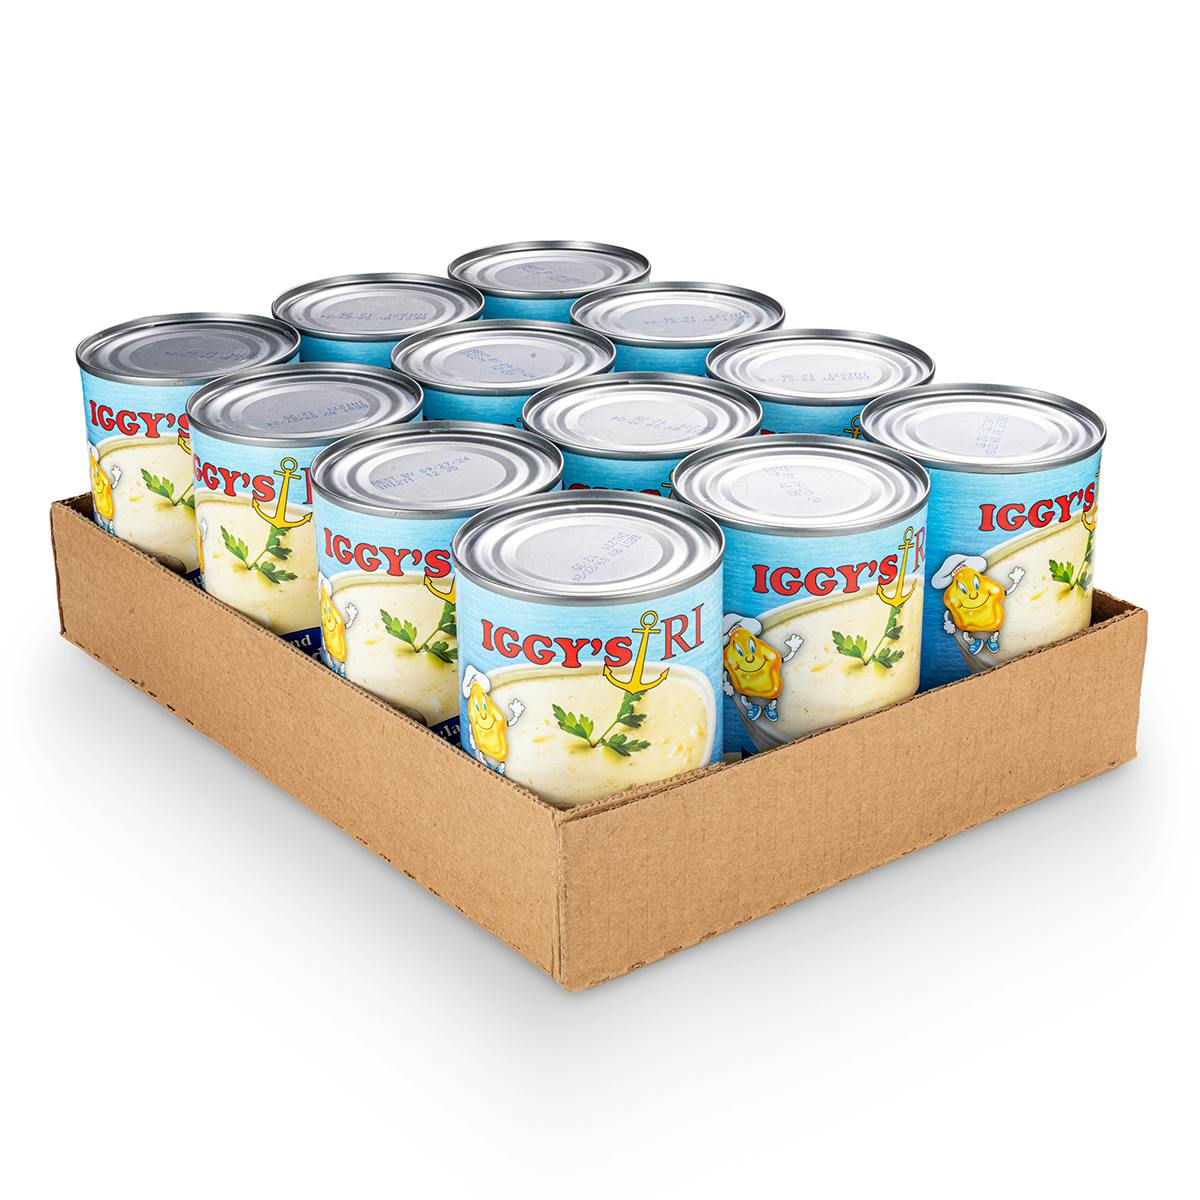 Iggy's New England Canned Clam Chowder 12 Pack